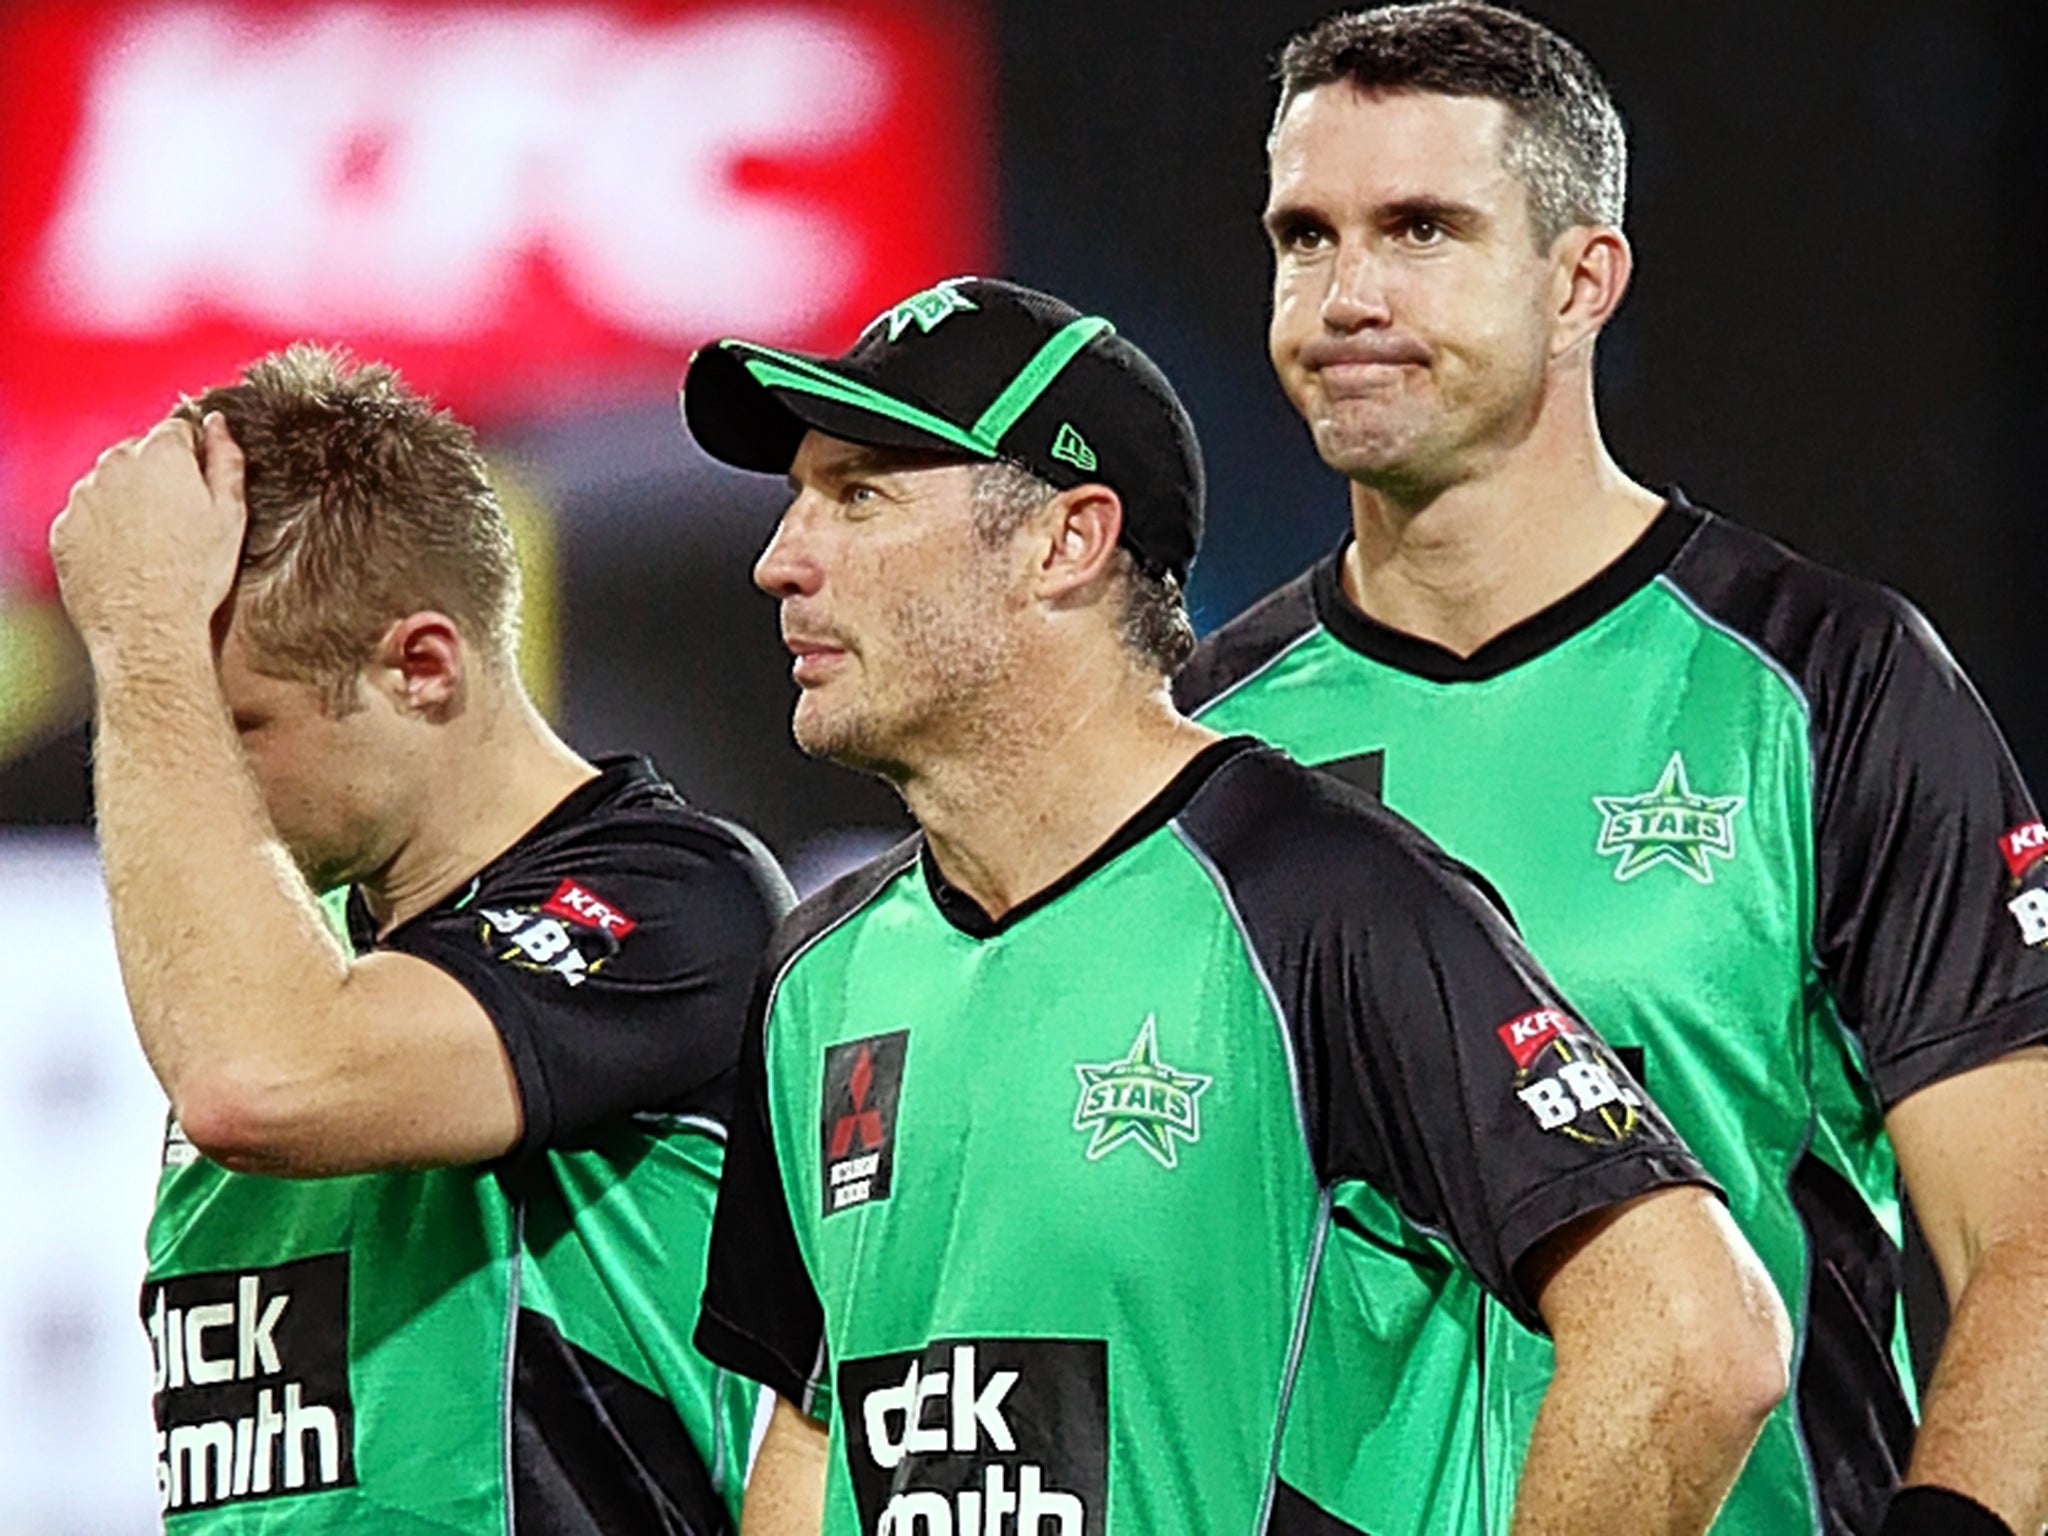 Tournaments around the world like Australia’s Big Bash featuring Kevin Pietersen (right) have sprung up in the wake of India’s IPL